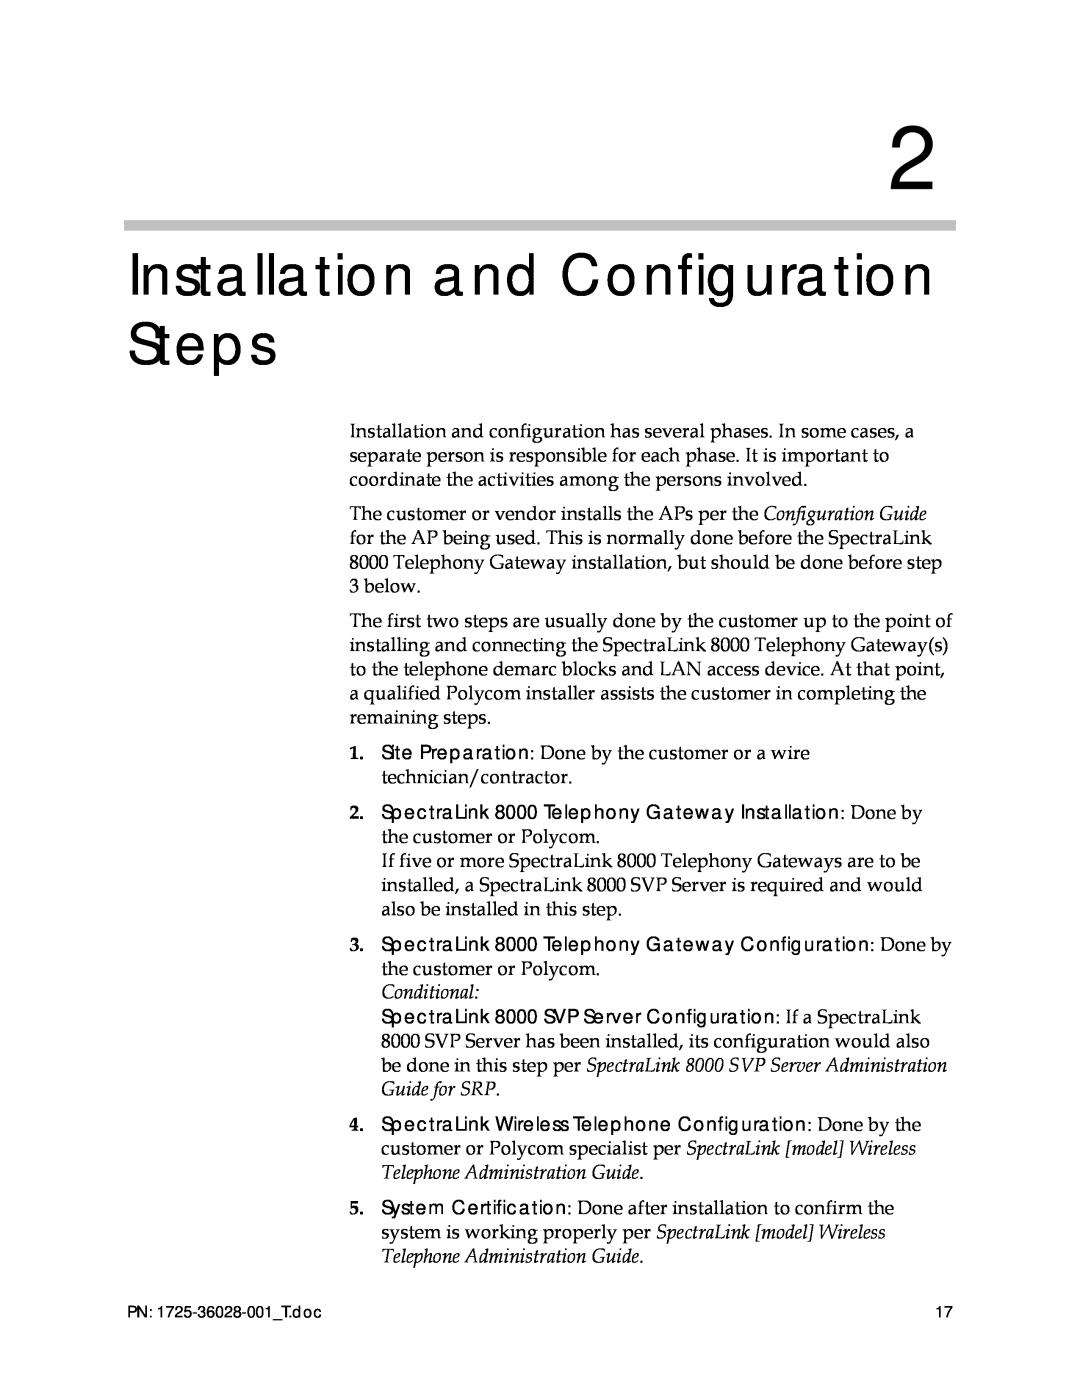 Polycom 1725-36028-001 manual Installation and Configuration Steps, Conditional 